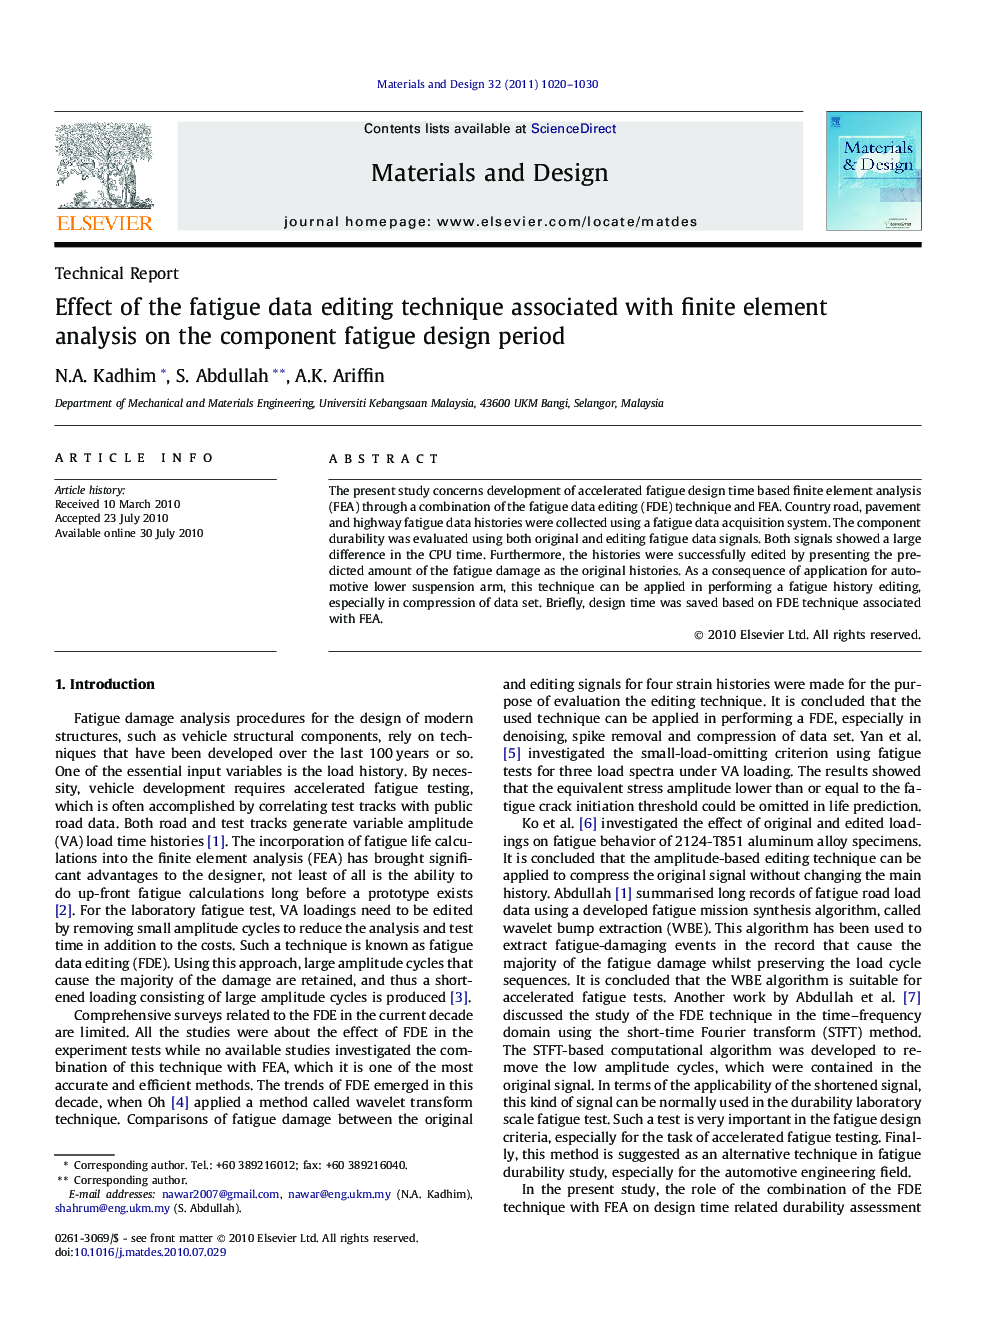 Effect of the fatigue data editing technique associated with finite element analysis on the component fatigue design period